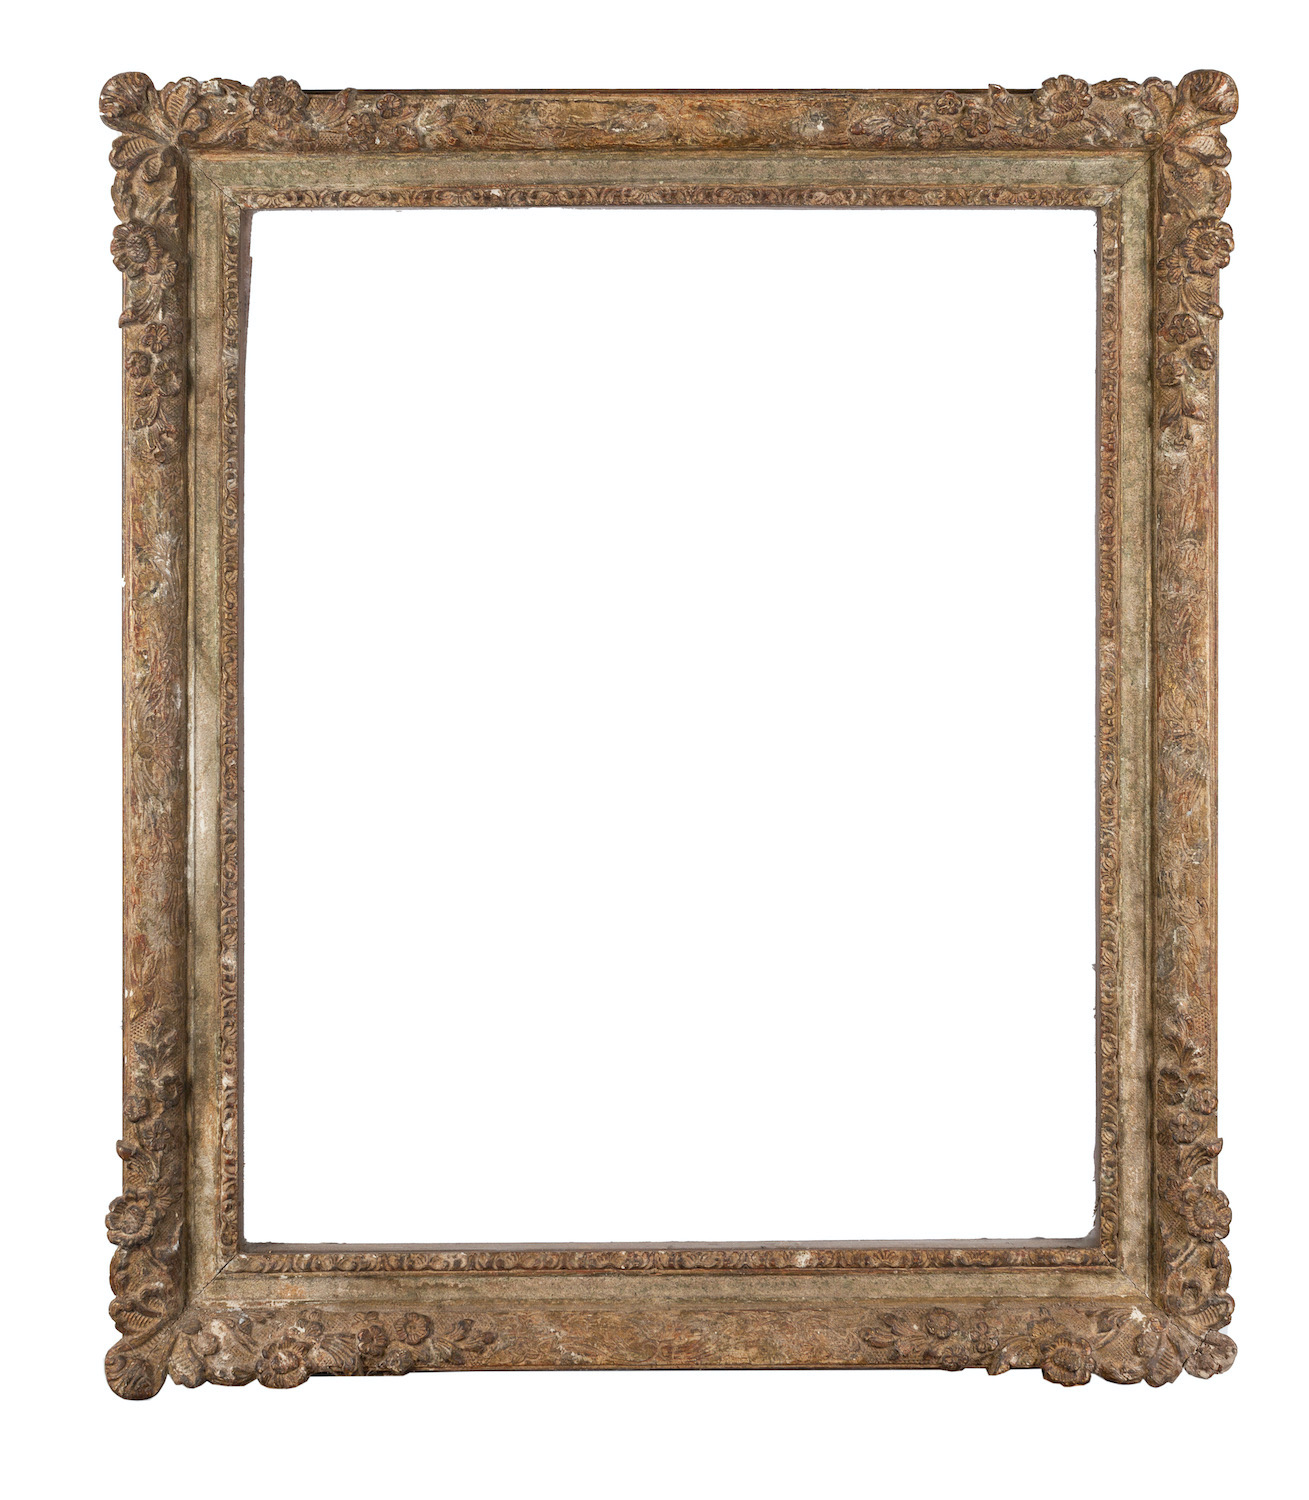 A gilded composite frame within a glazed display case - rebate 38 x 30.